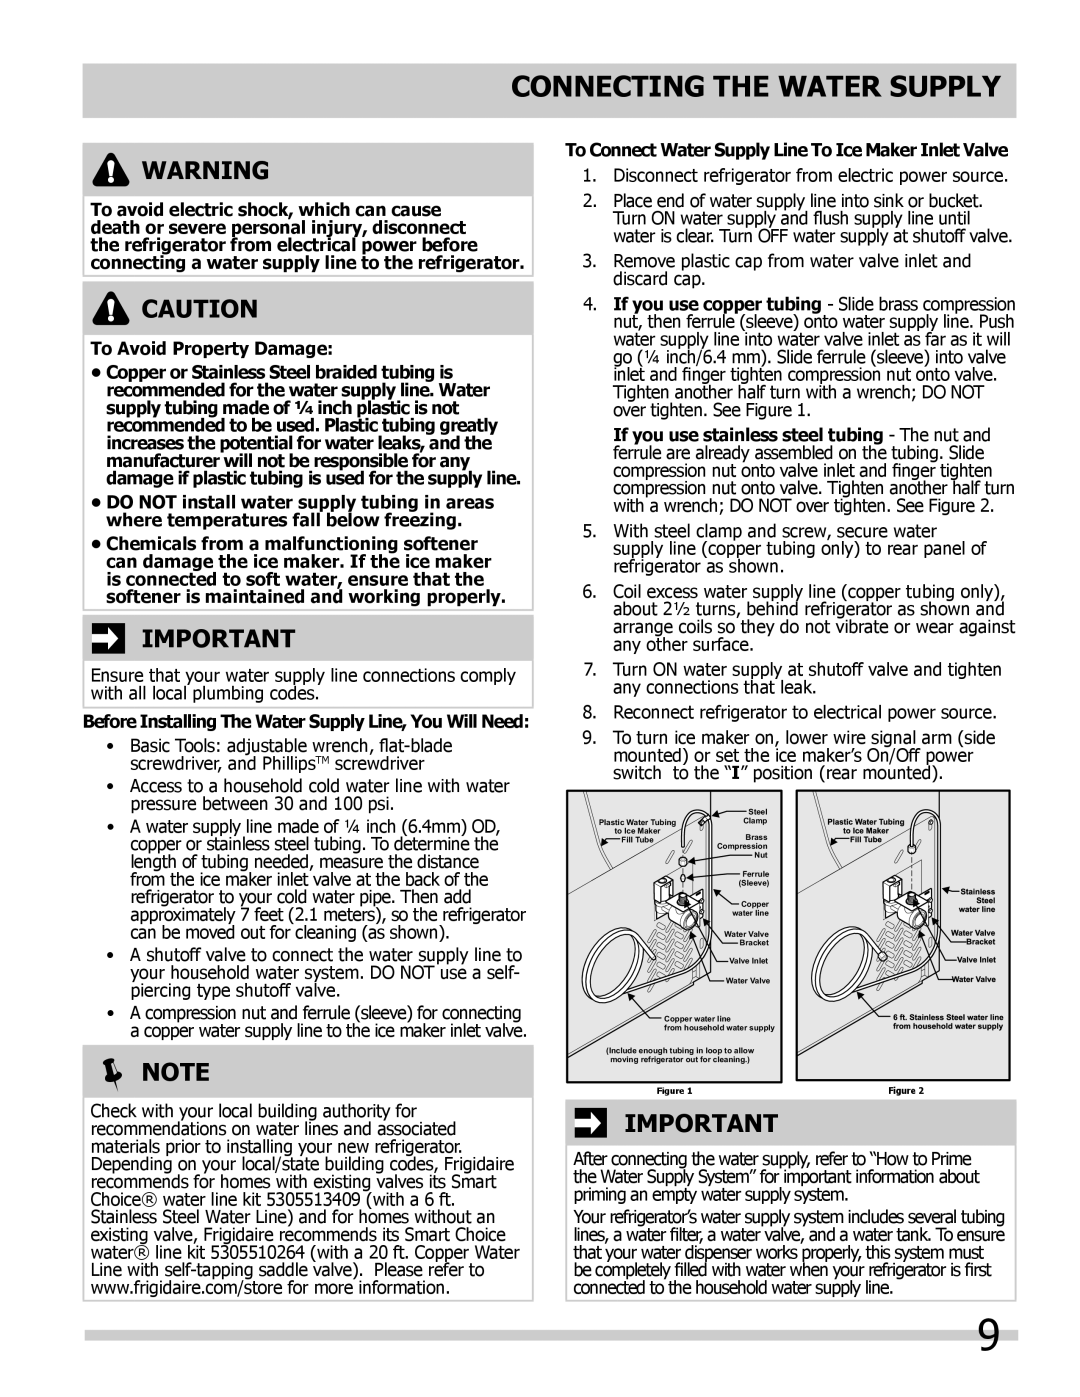 Frigidaire FFHS2322MM, FFUS2613LM, FFUS2613LE, FFUS2613LP, FFHS2322MQ manual Connecting the Water Supply, Note 